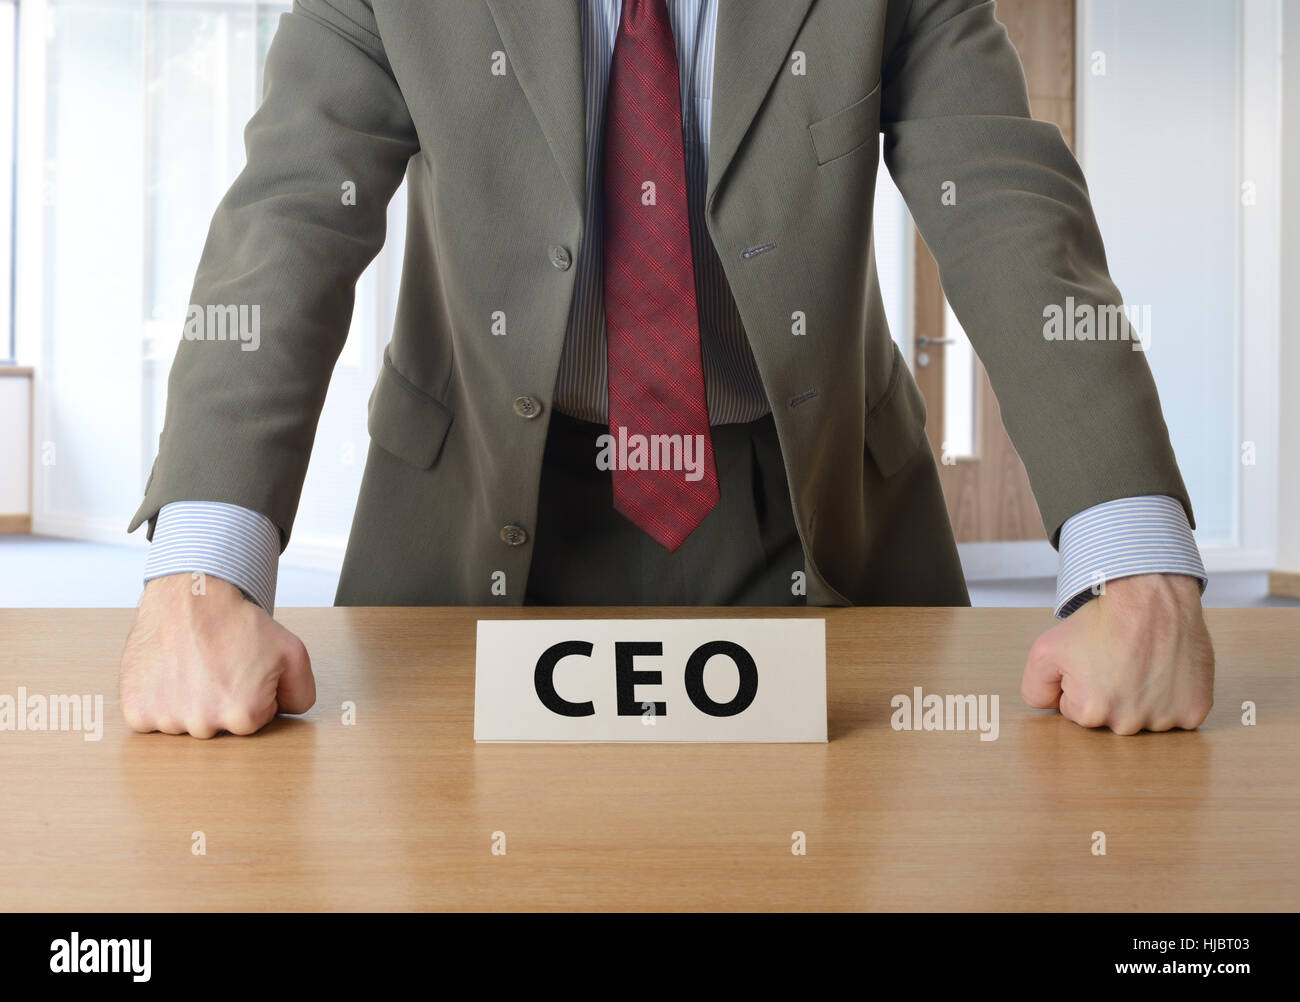 CEO leaning on desk in an office Stock Photo